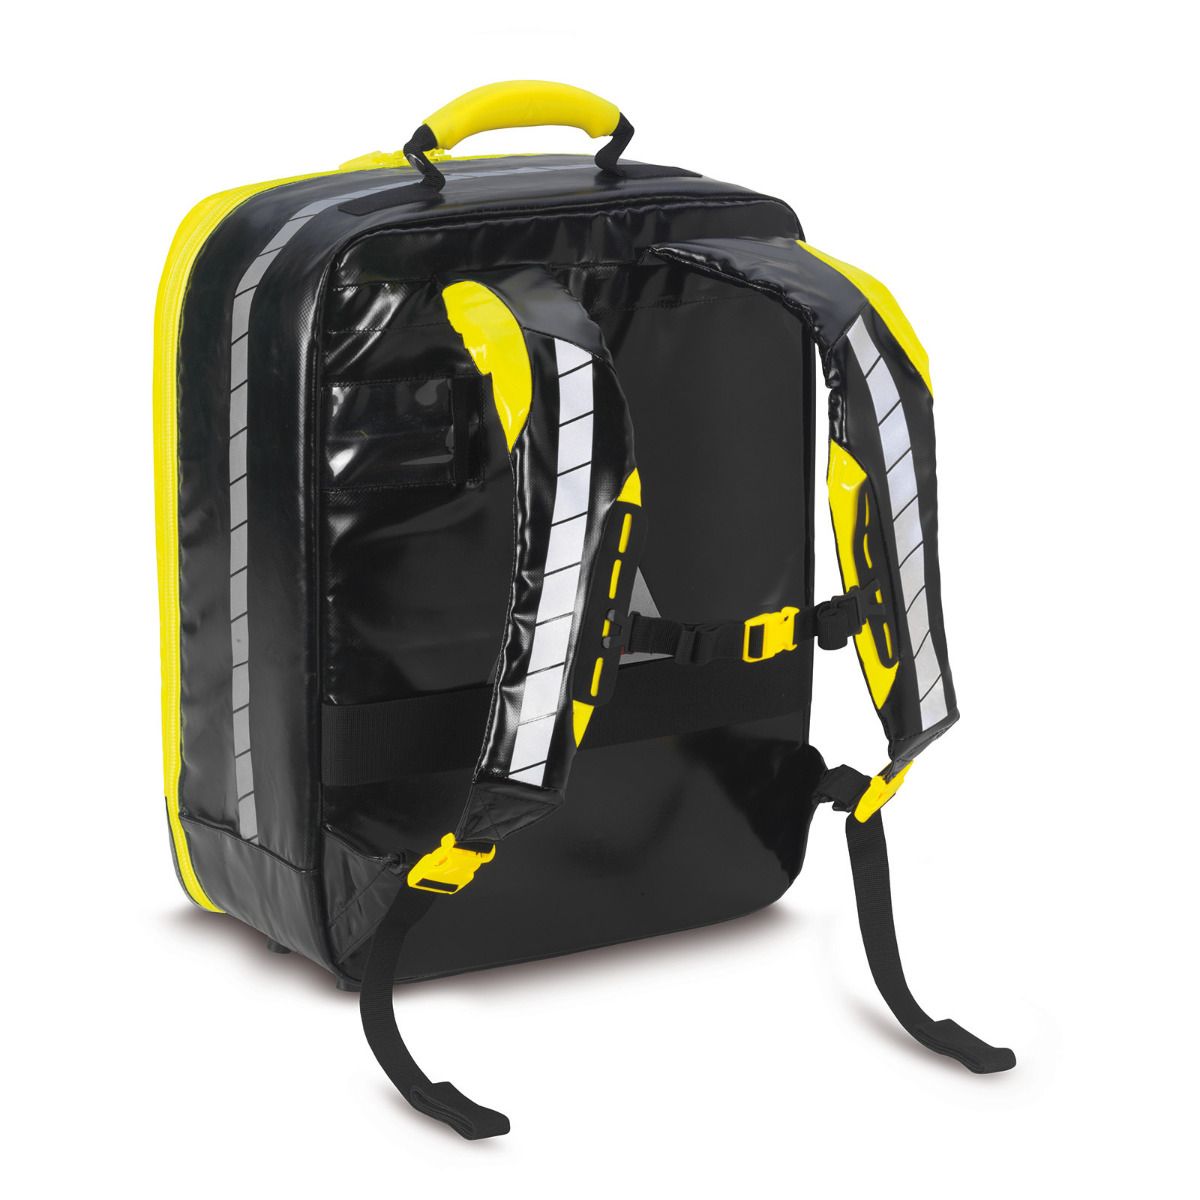 PAX Rapid Response Team Backpack Large